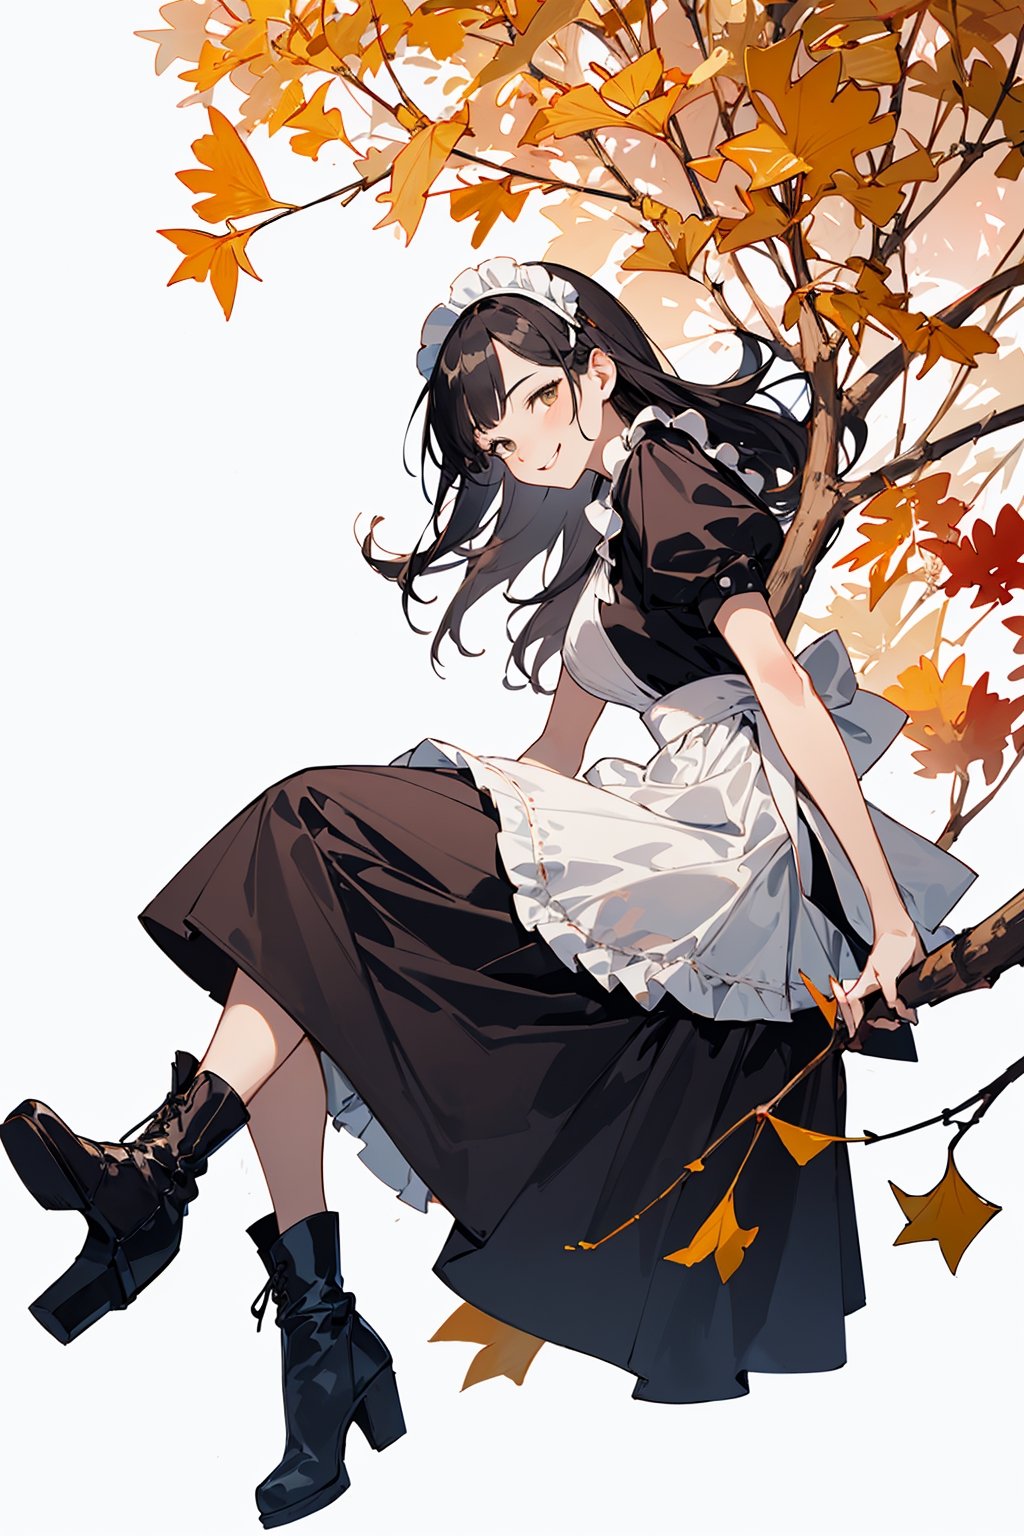 ((Botanical art white background:1.3)),1 girl,from side,dynamic pose, sitting, chubby, long hair, maid dress, boots, smile, autumn, lots of maple leaves and ginkgo trees with red leaves